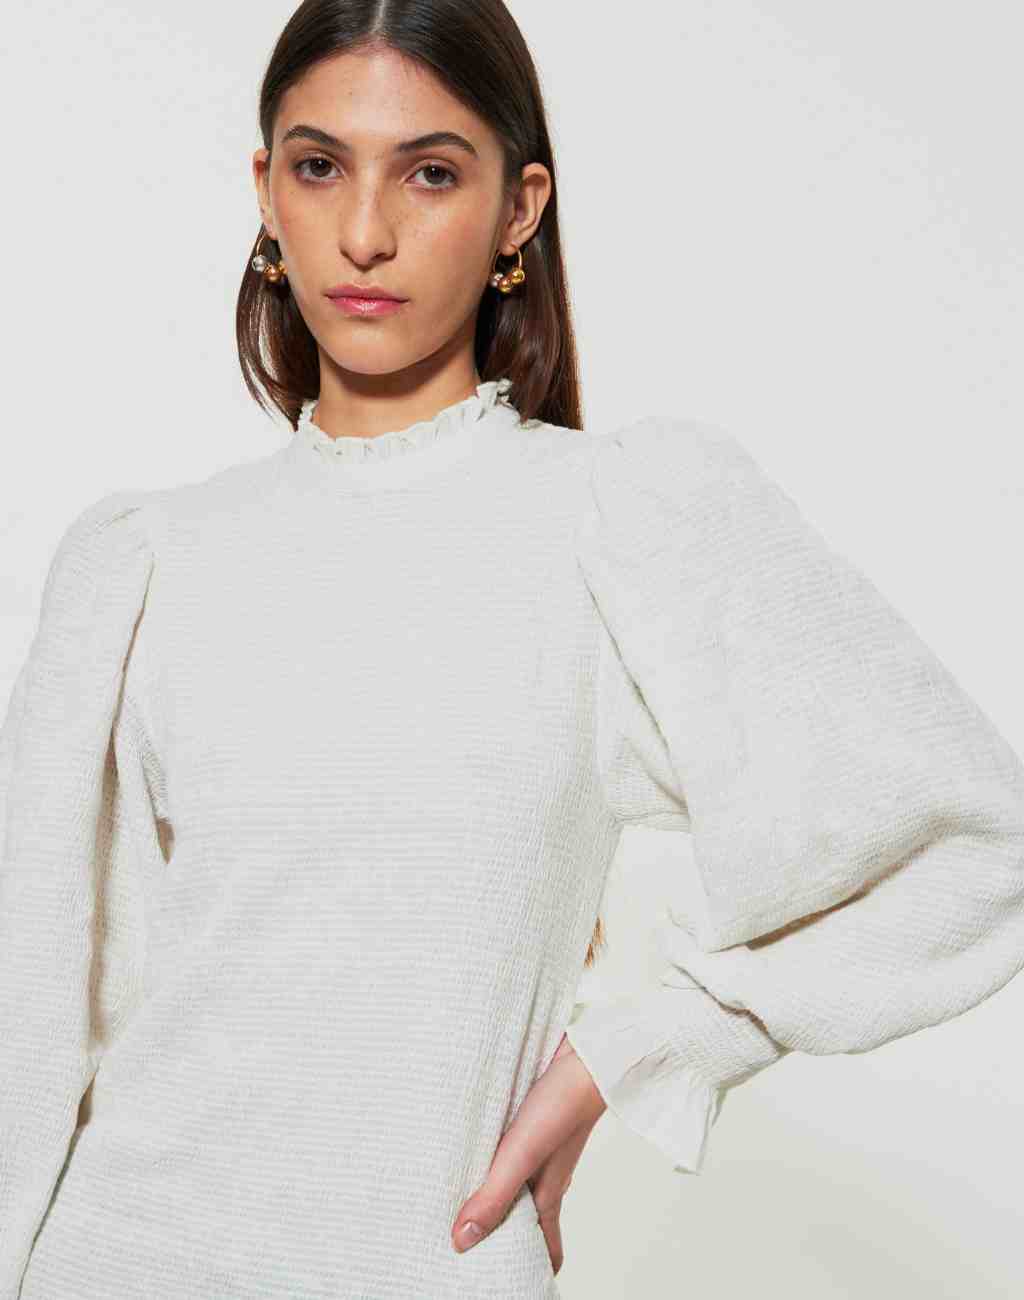 Smocked Hitala Off White Blouse with Ruffled Collar, Cuffs, and Hem | Ideal for Layering